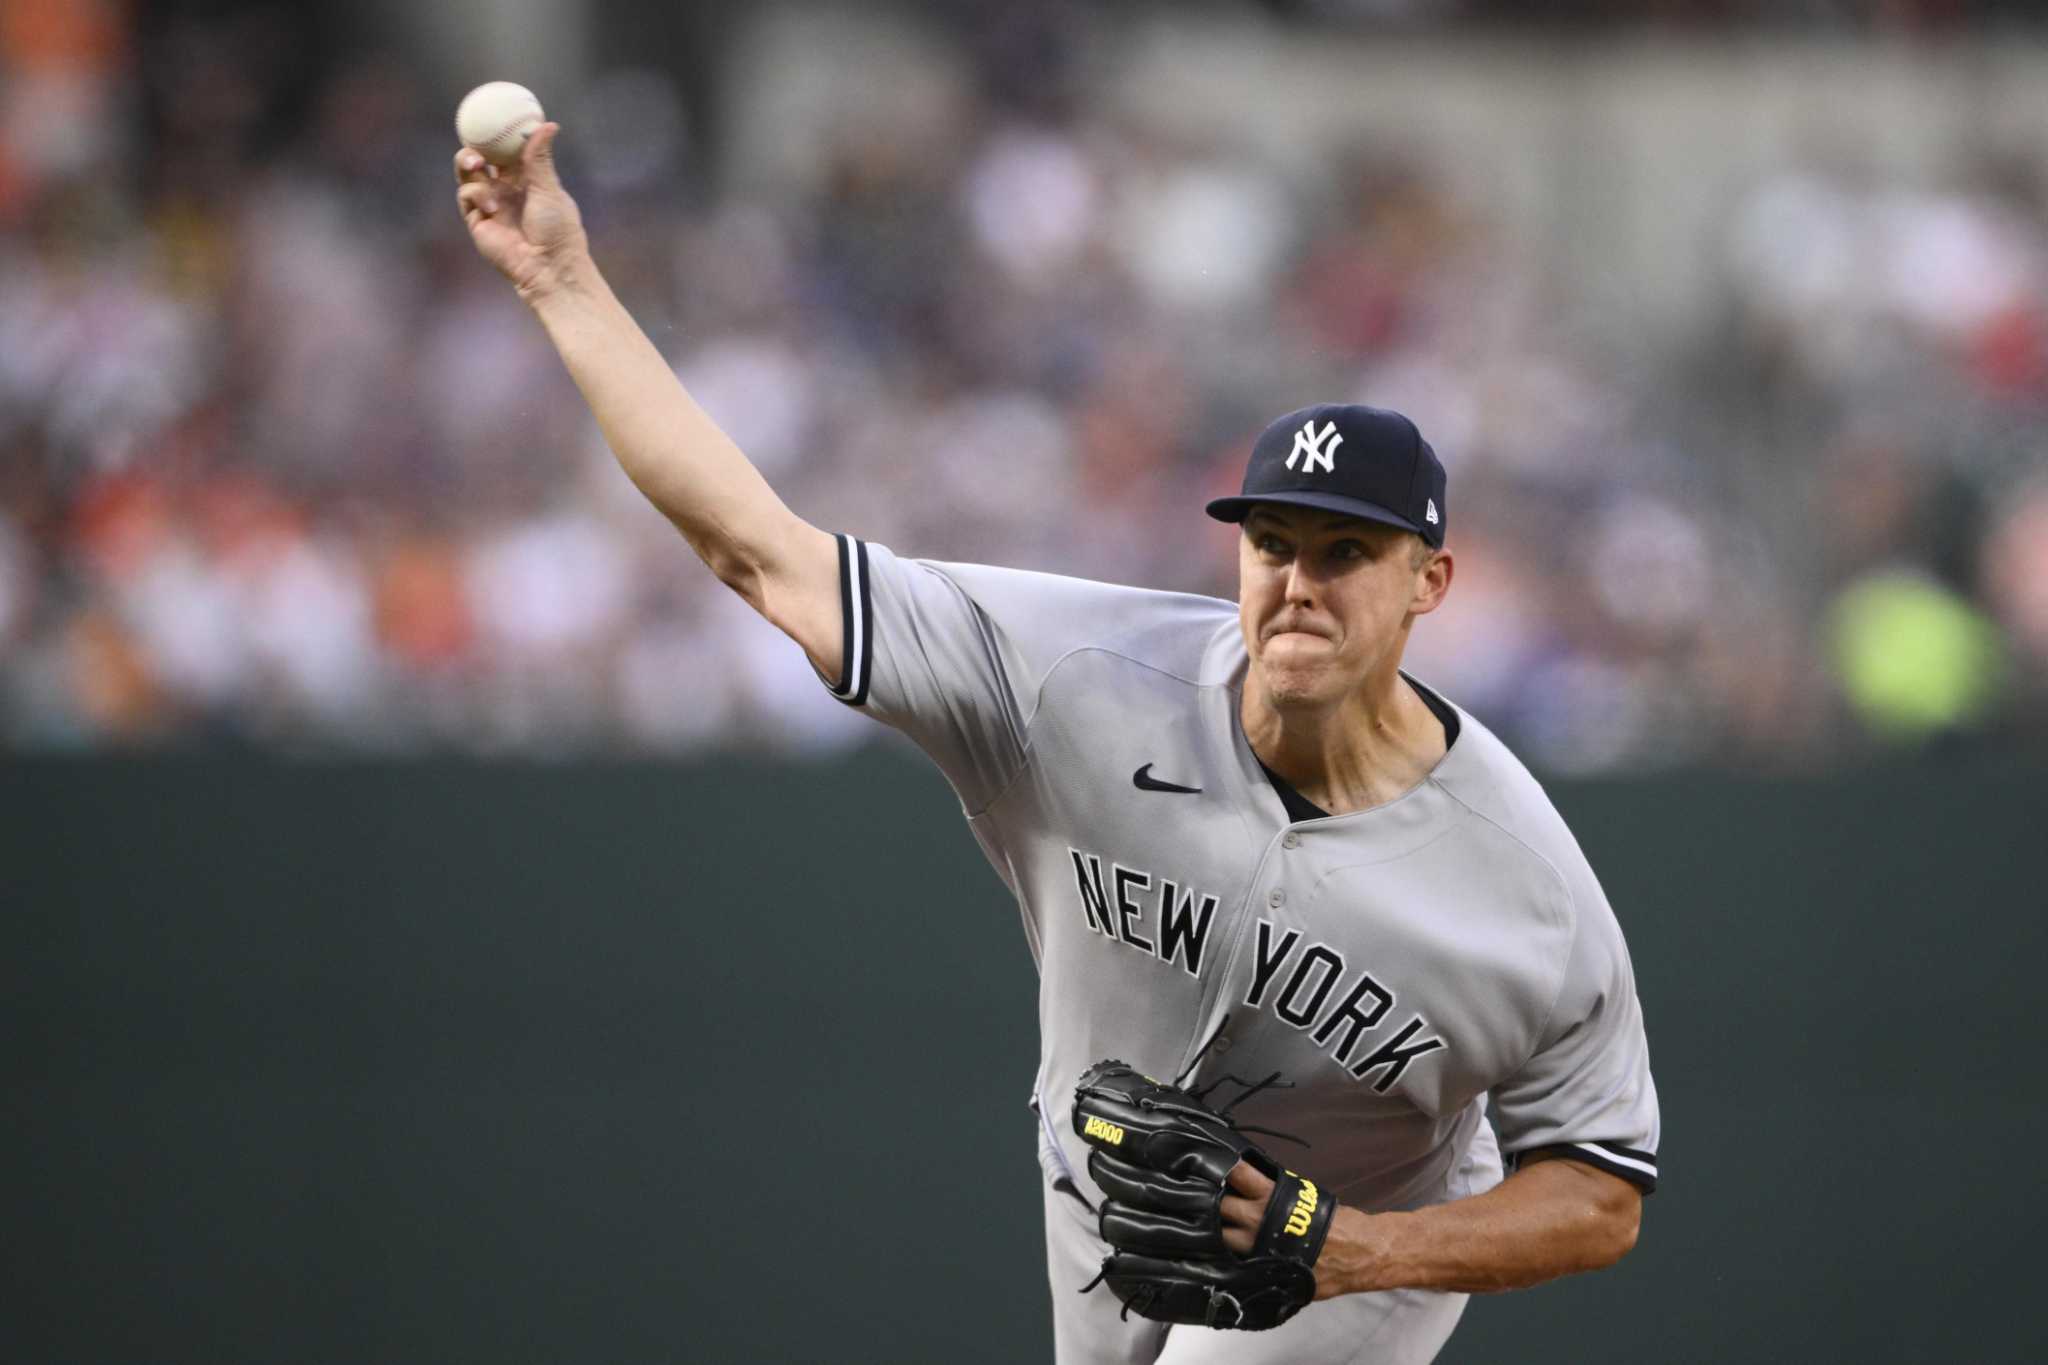 The Woodlands' Taillon continues to contribute for first-place Yankees